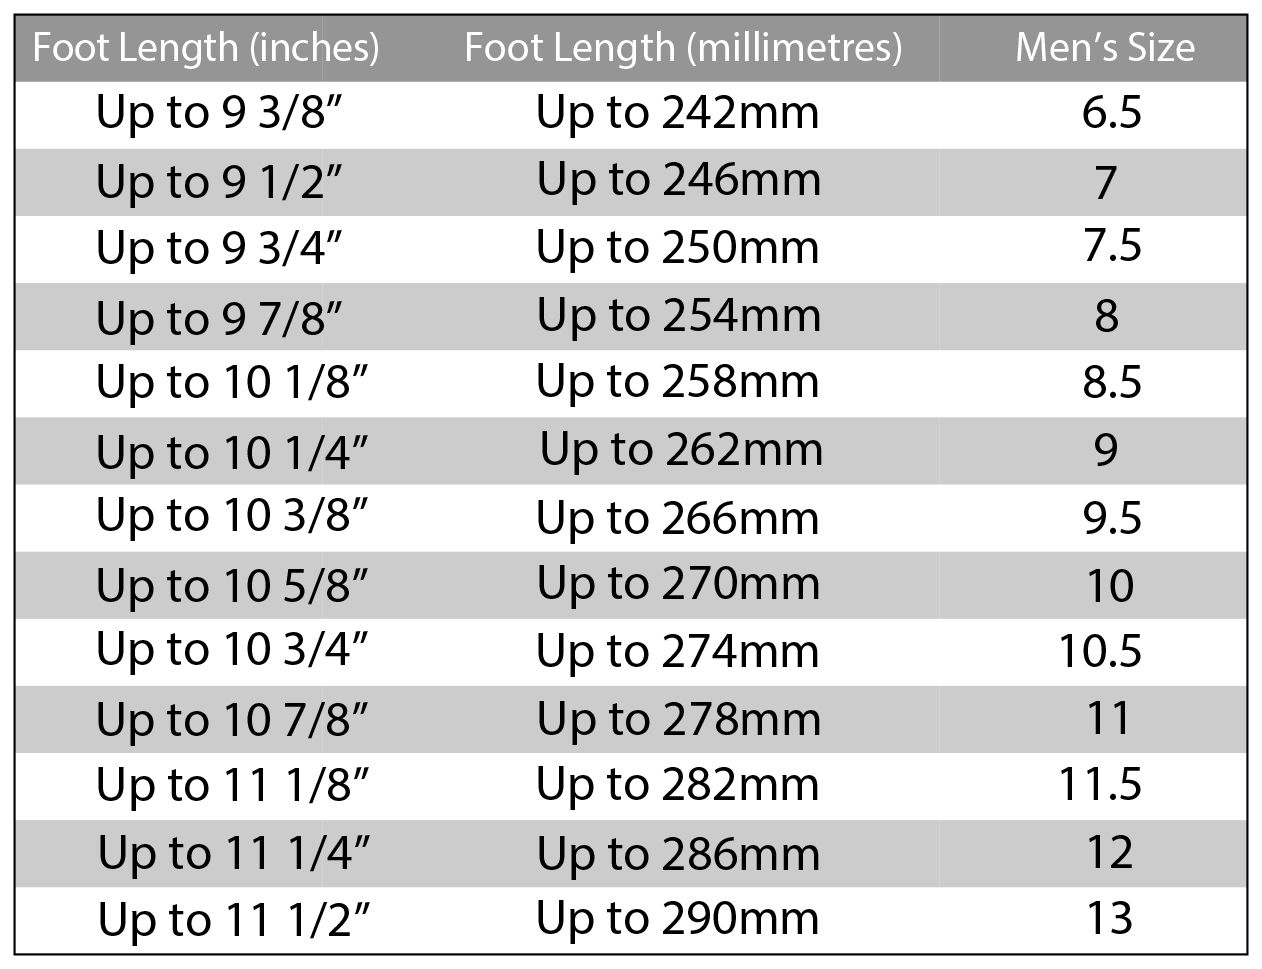 Xero Shoes Size Guide - www.inf-inet.com